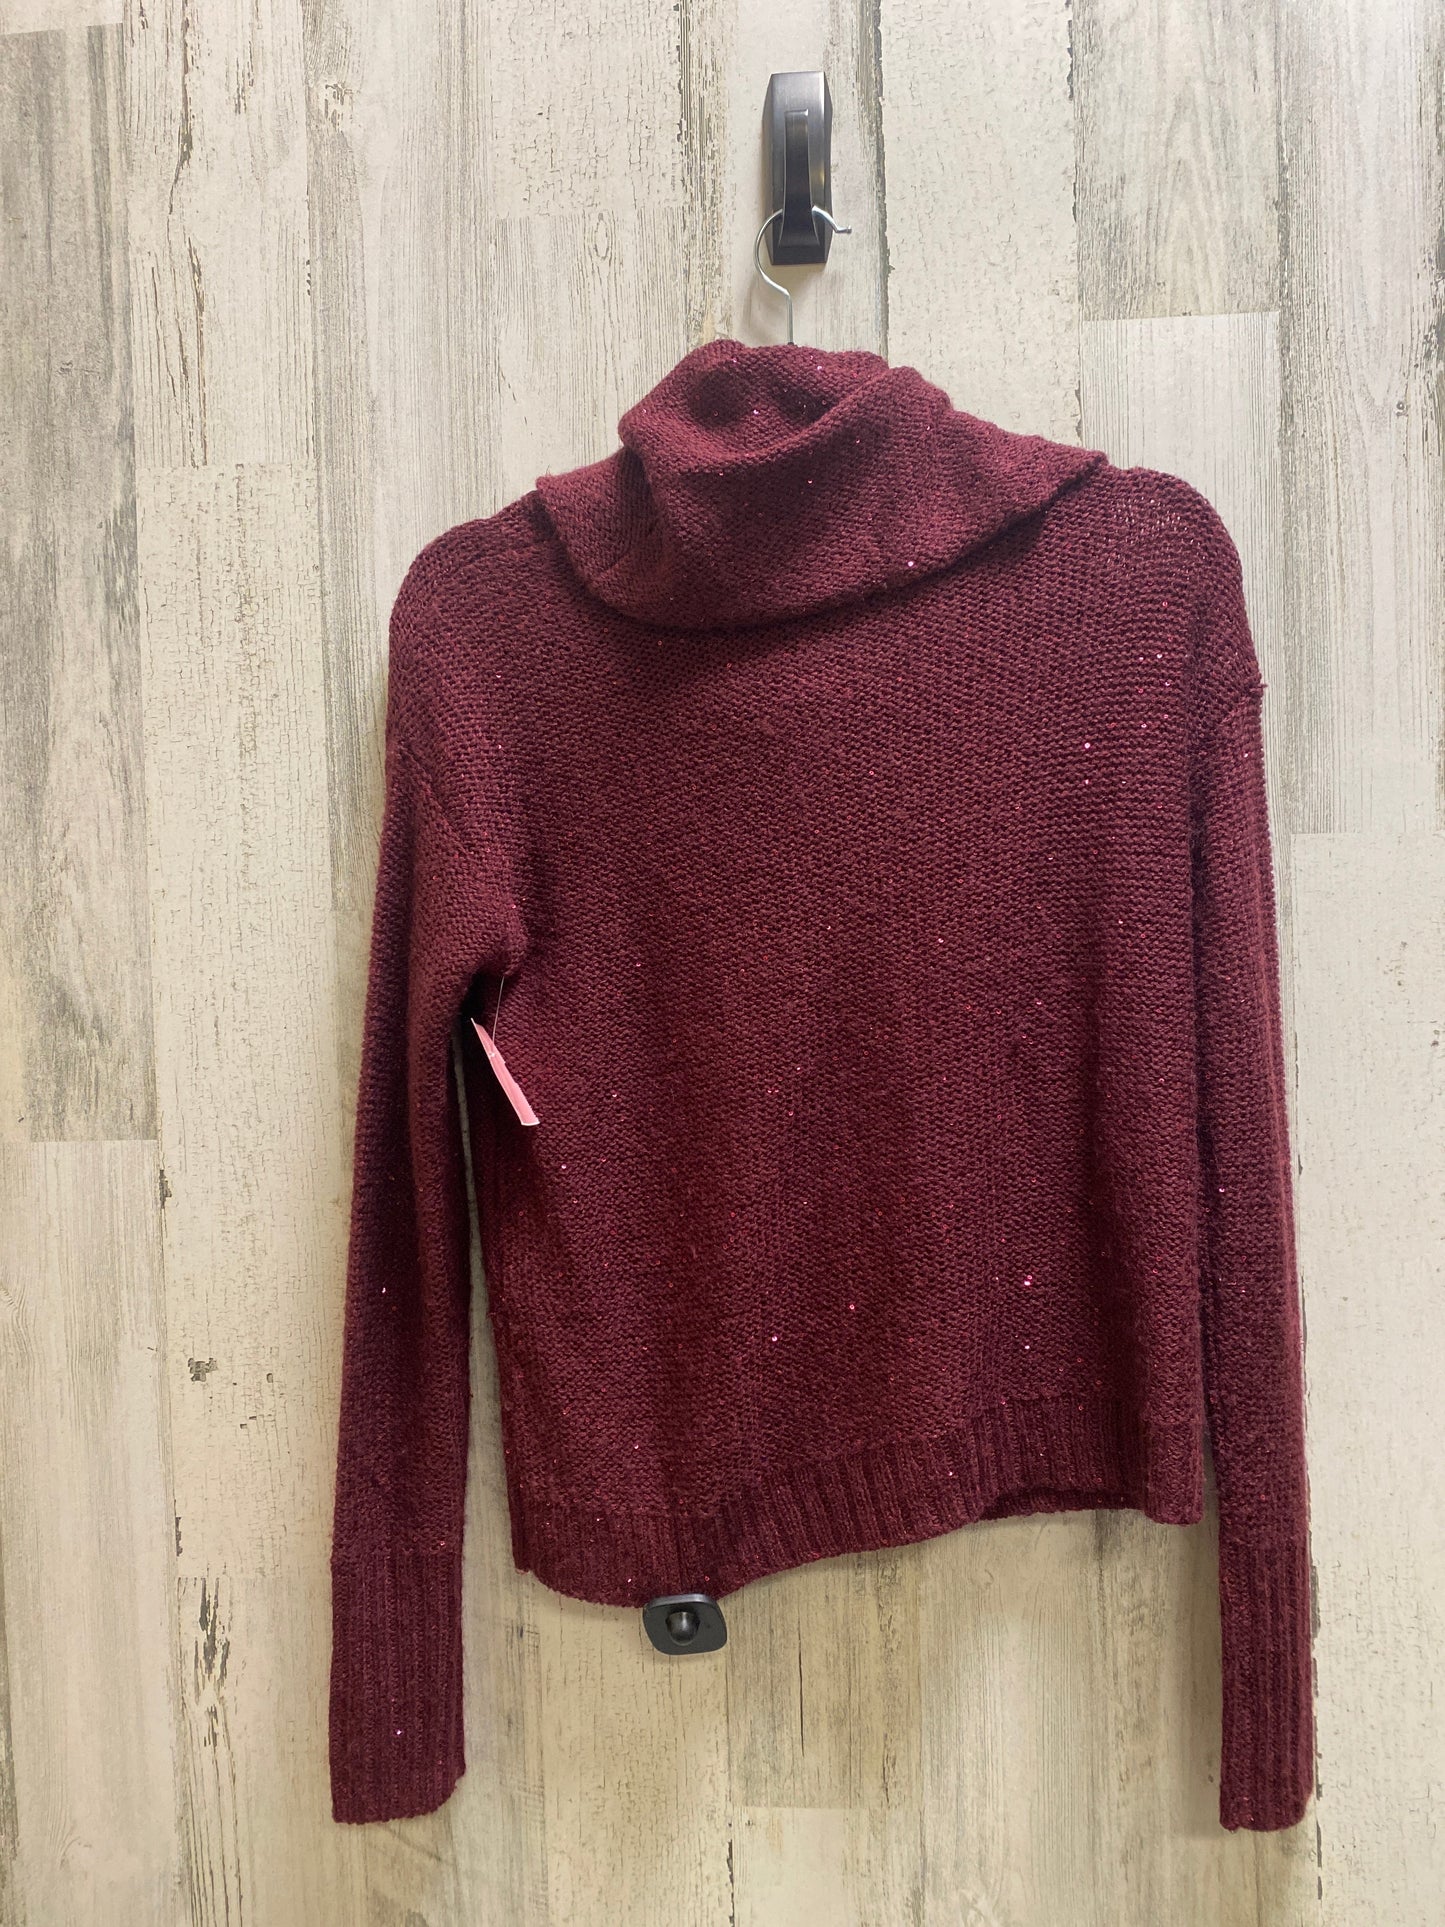 Sweater By Kensie  Size: S